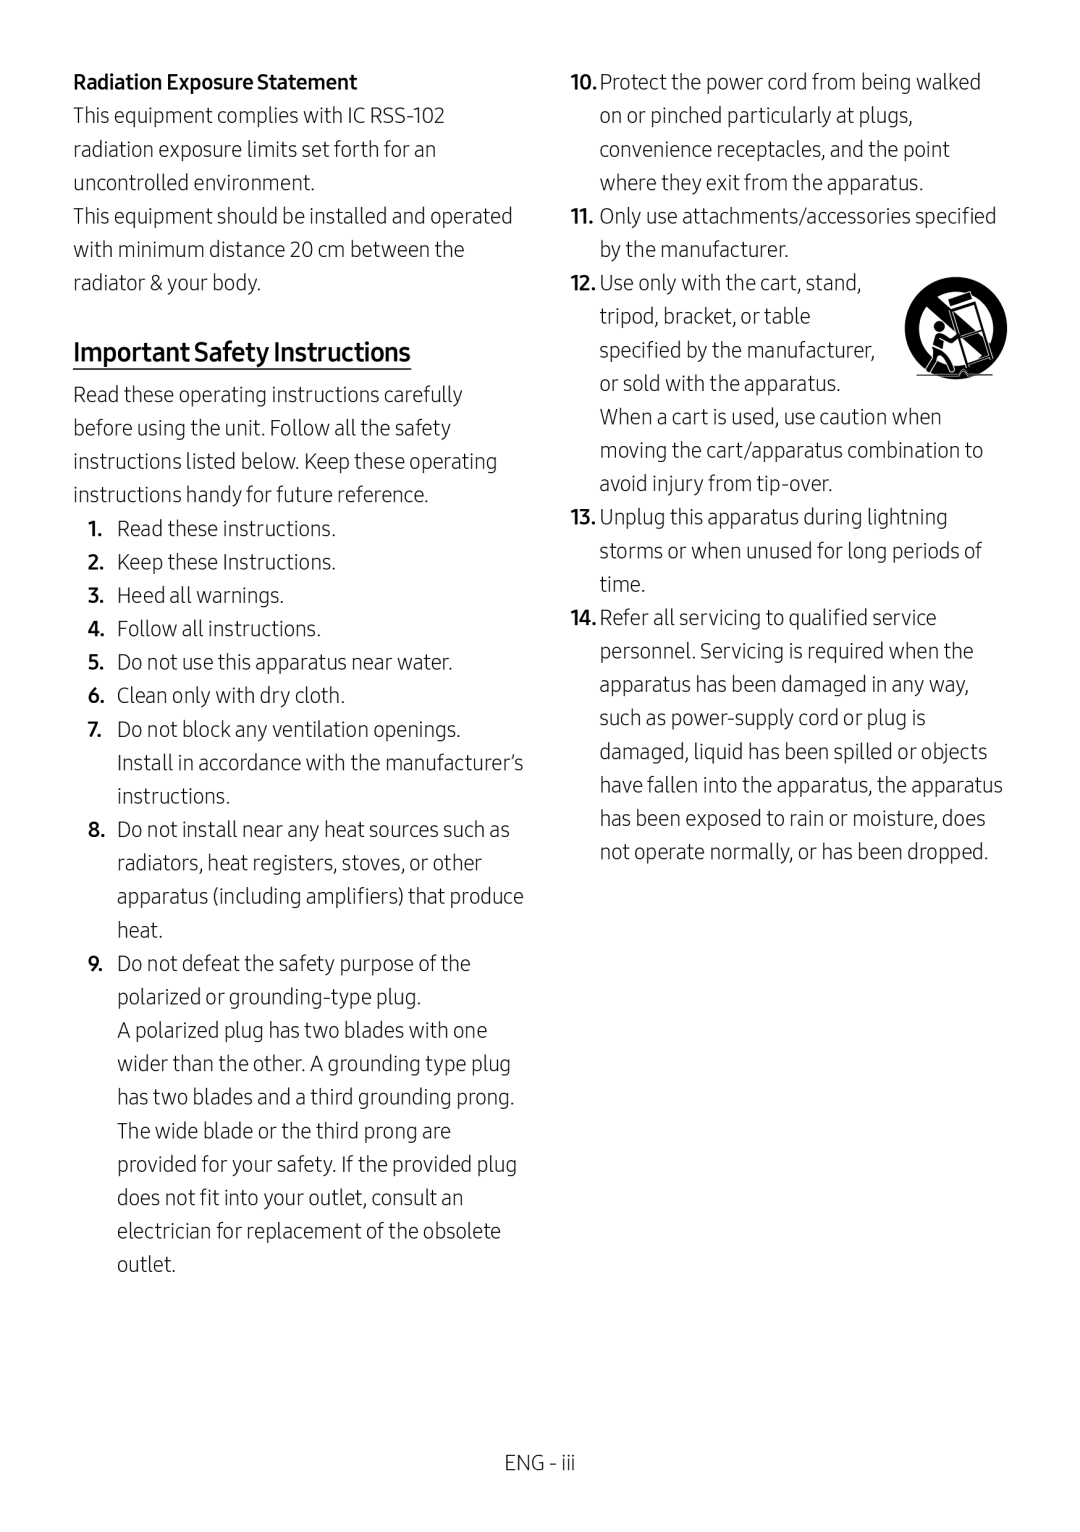 Important Safety Instructions Standard HW-N400